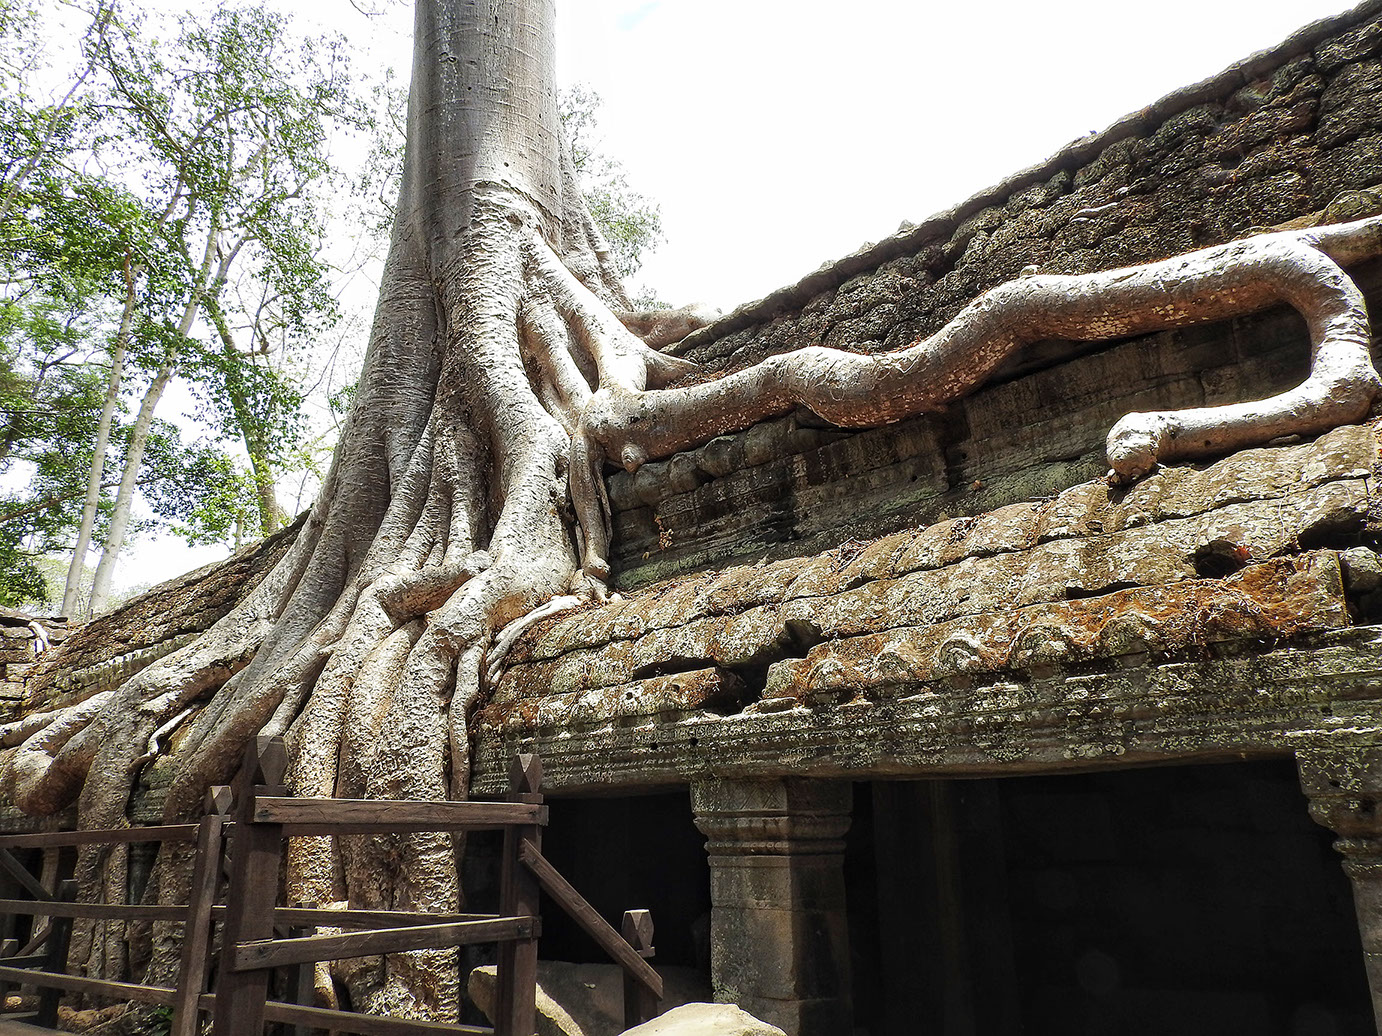 The thick vegetation in Ta Prohm blends into the intriguing structures